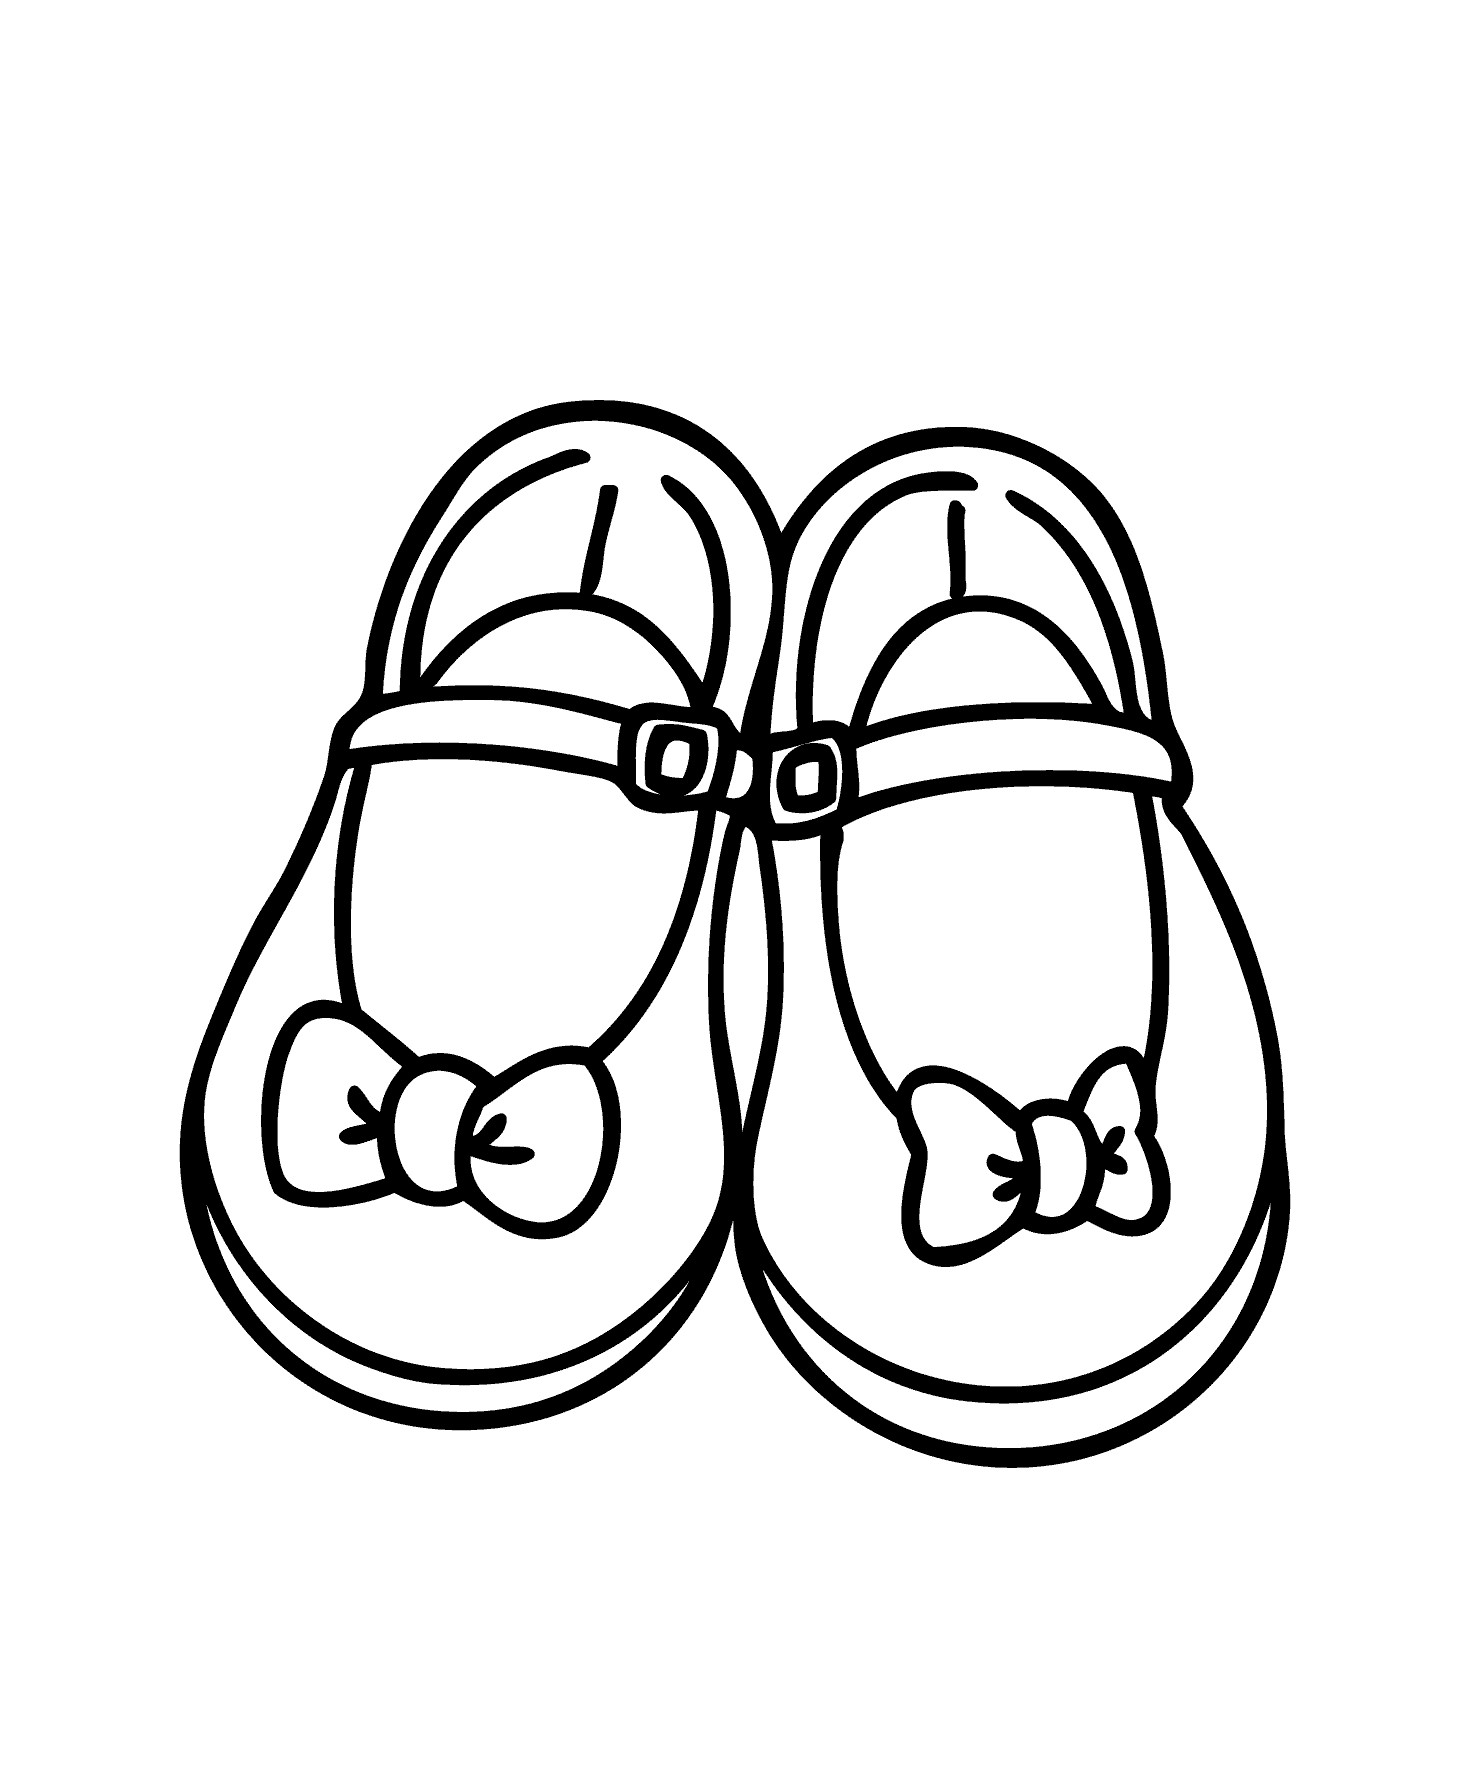 Girls Shoes Coloring Pages
 Shoes Coloring Pages coloringsuite